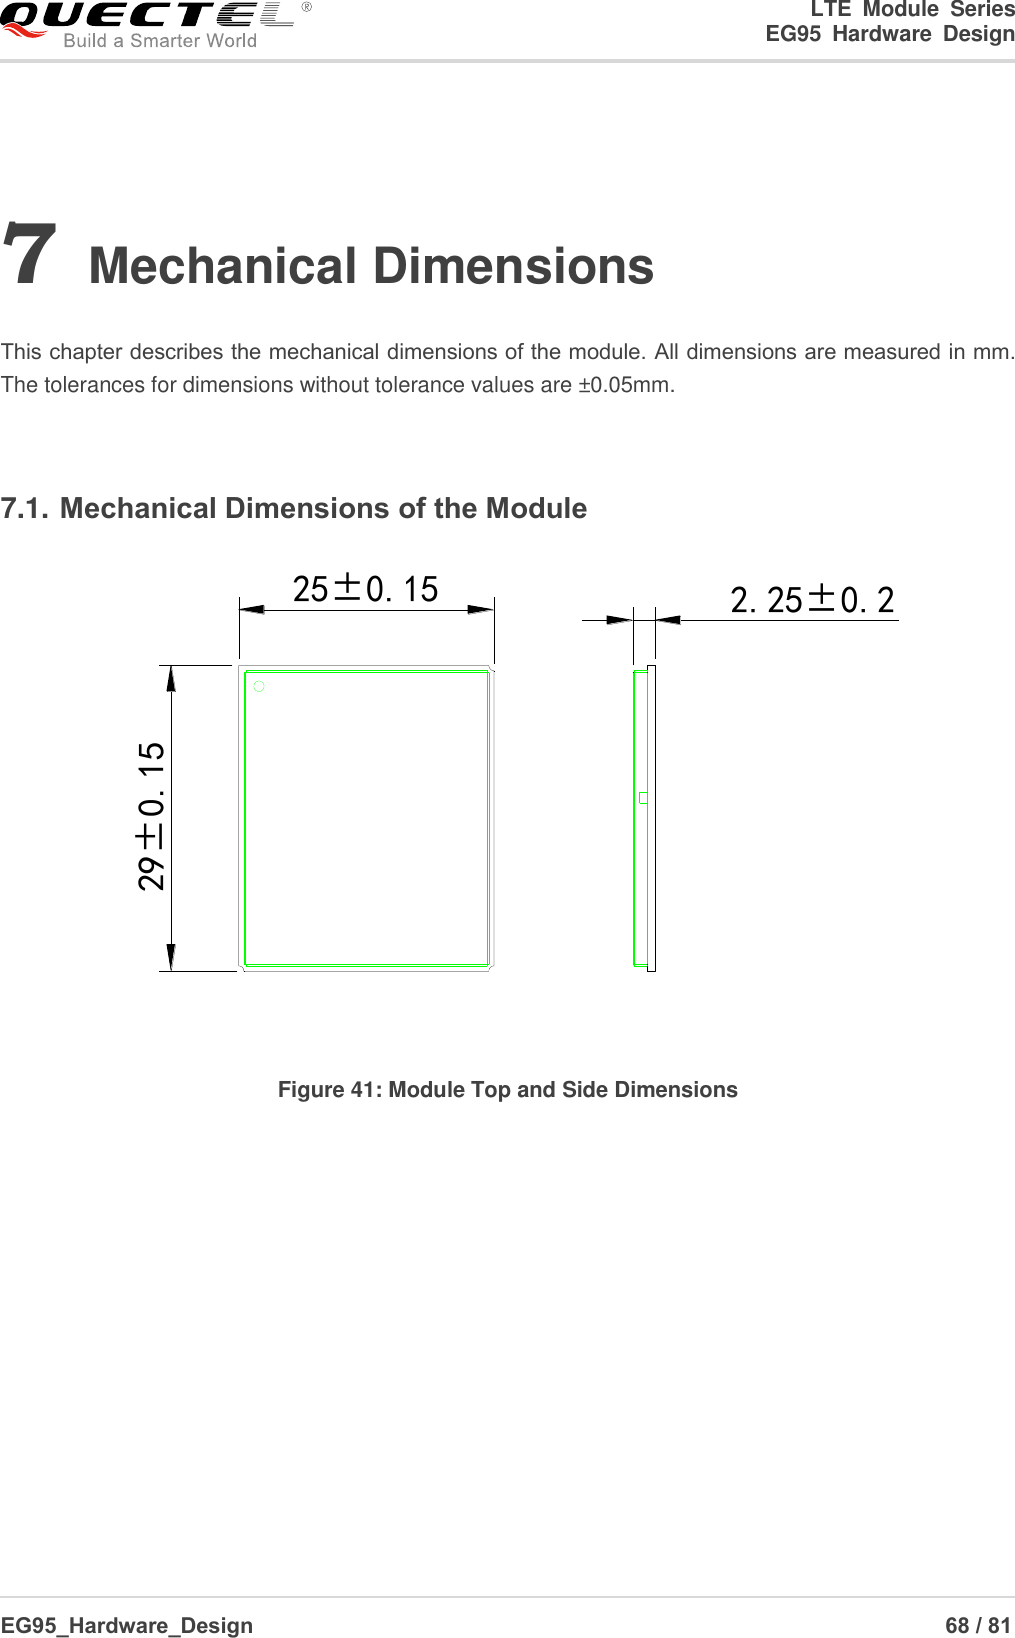 LTE  Module  Series                                                  EG95  Hardware  Design  EG95_Hardware_Design                                                                   68 / 81    7 Mechanical Dimensions  This chapter describes the mechanical dimensions of the module. All dimensions are measured in mm. The tolerances for dimensions without tolerance values are ±0.05mm.  7.1. Mechanical Dimensions of the Module 25±0.1529±0.15 2.25±0.2 Figure 41: Module Top and Side Dimensions  